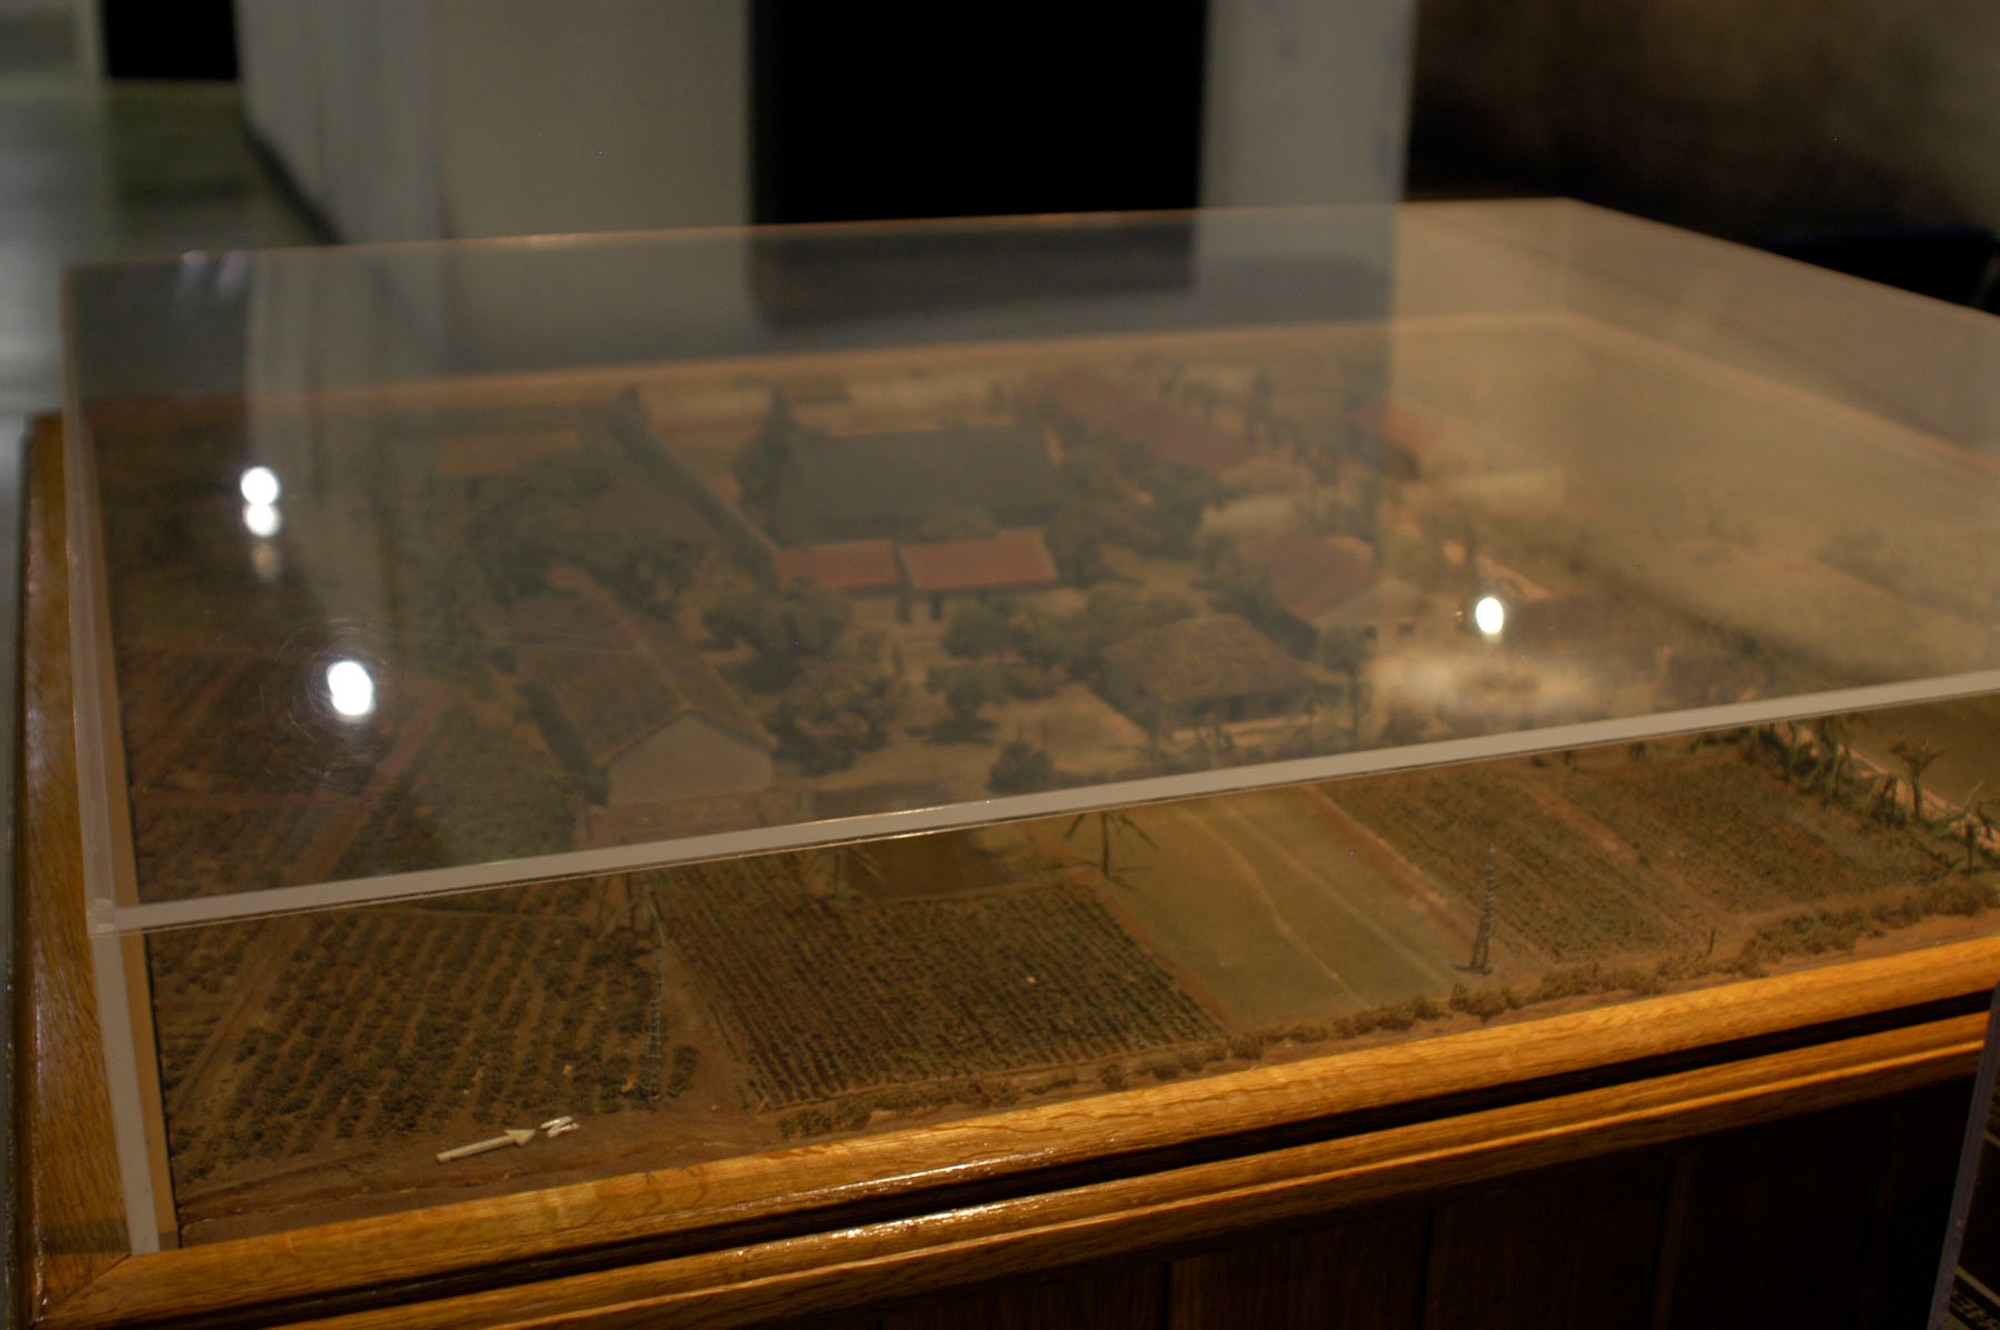 DAYTON, Ohio - The CIA made this detailed model of the Son Tay prison camp after studying reconnaissance photographs. The raiders used the model in planning and for memorizing the camp’s layout. The model was called BARBARA, after a USAF secretary, Barbara L. Strosnider, who worked very long days supporting planning for the raid. The model is on display in the Return with Honor: American Prisoners of War exhibit in the Southeast Asia War Gallery at the National Museum of the U.S. Air Force. (U.S. Air Force photo)